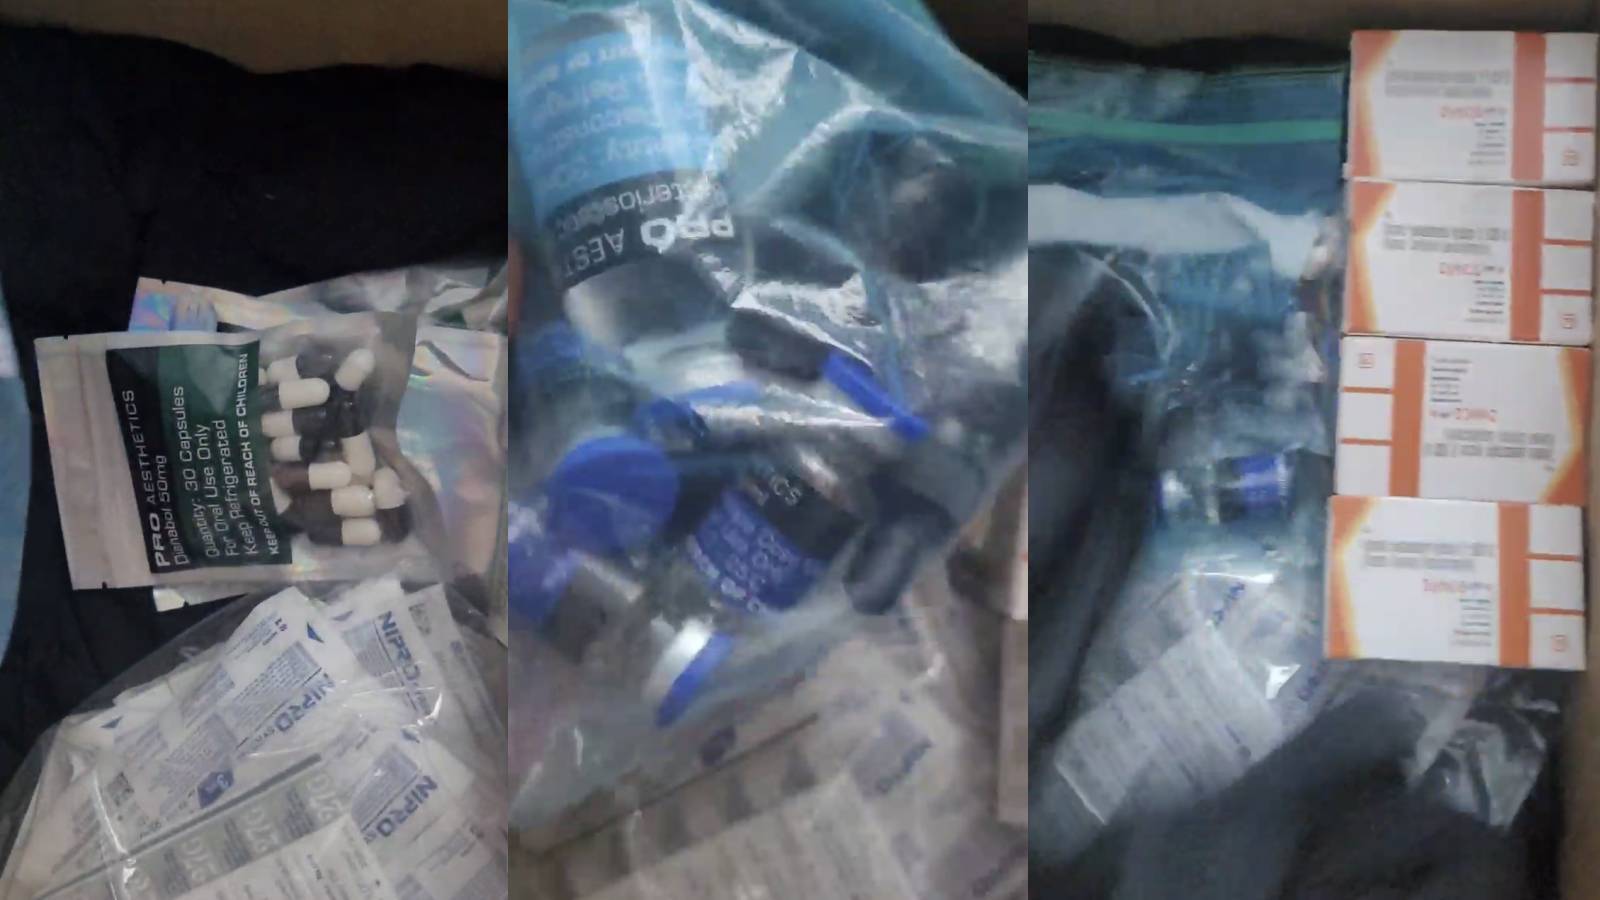 Screenshots from the unboxing video of the drugs found at the bottom of the box. 